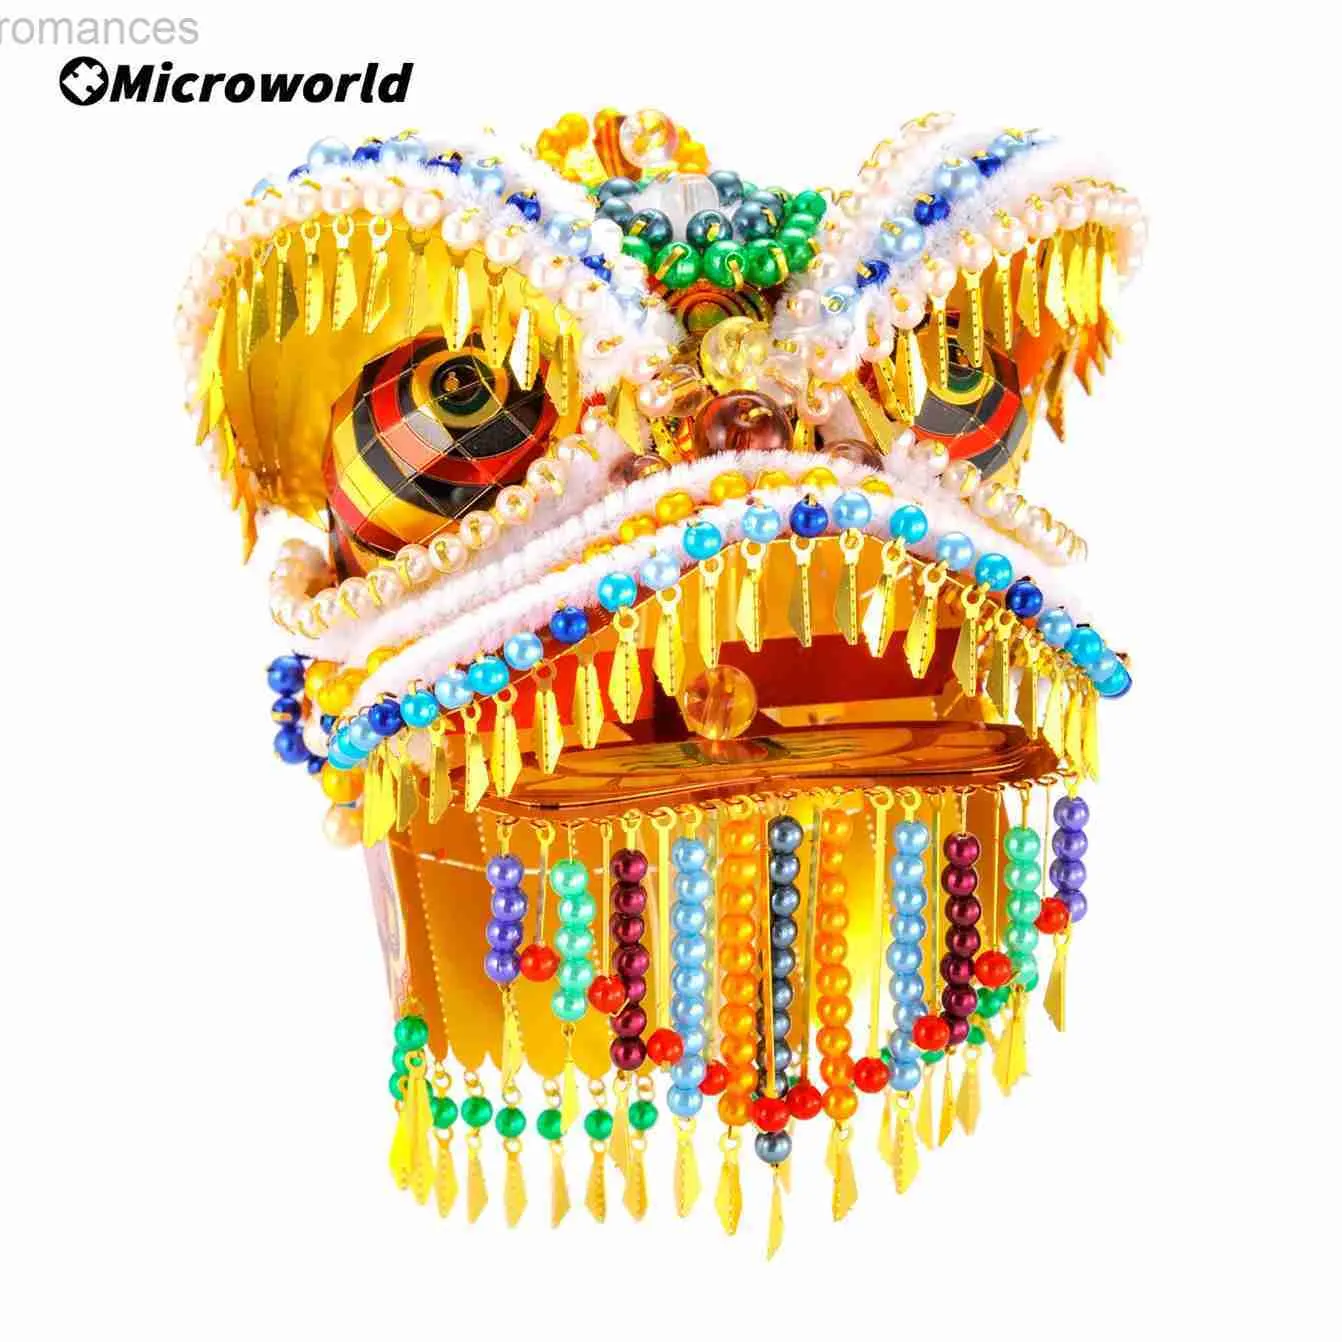 3D -pussel Microworld 3D Metal Puzzle Chinese Traditionell kultur Lejondansmodellpaket DIY Montering Jigsaw Toys Gifts For Adult Gifts 240314